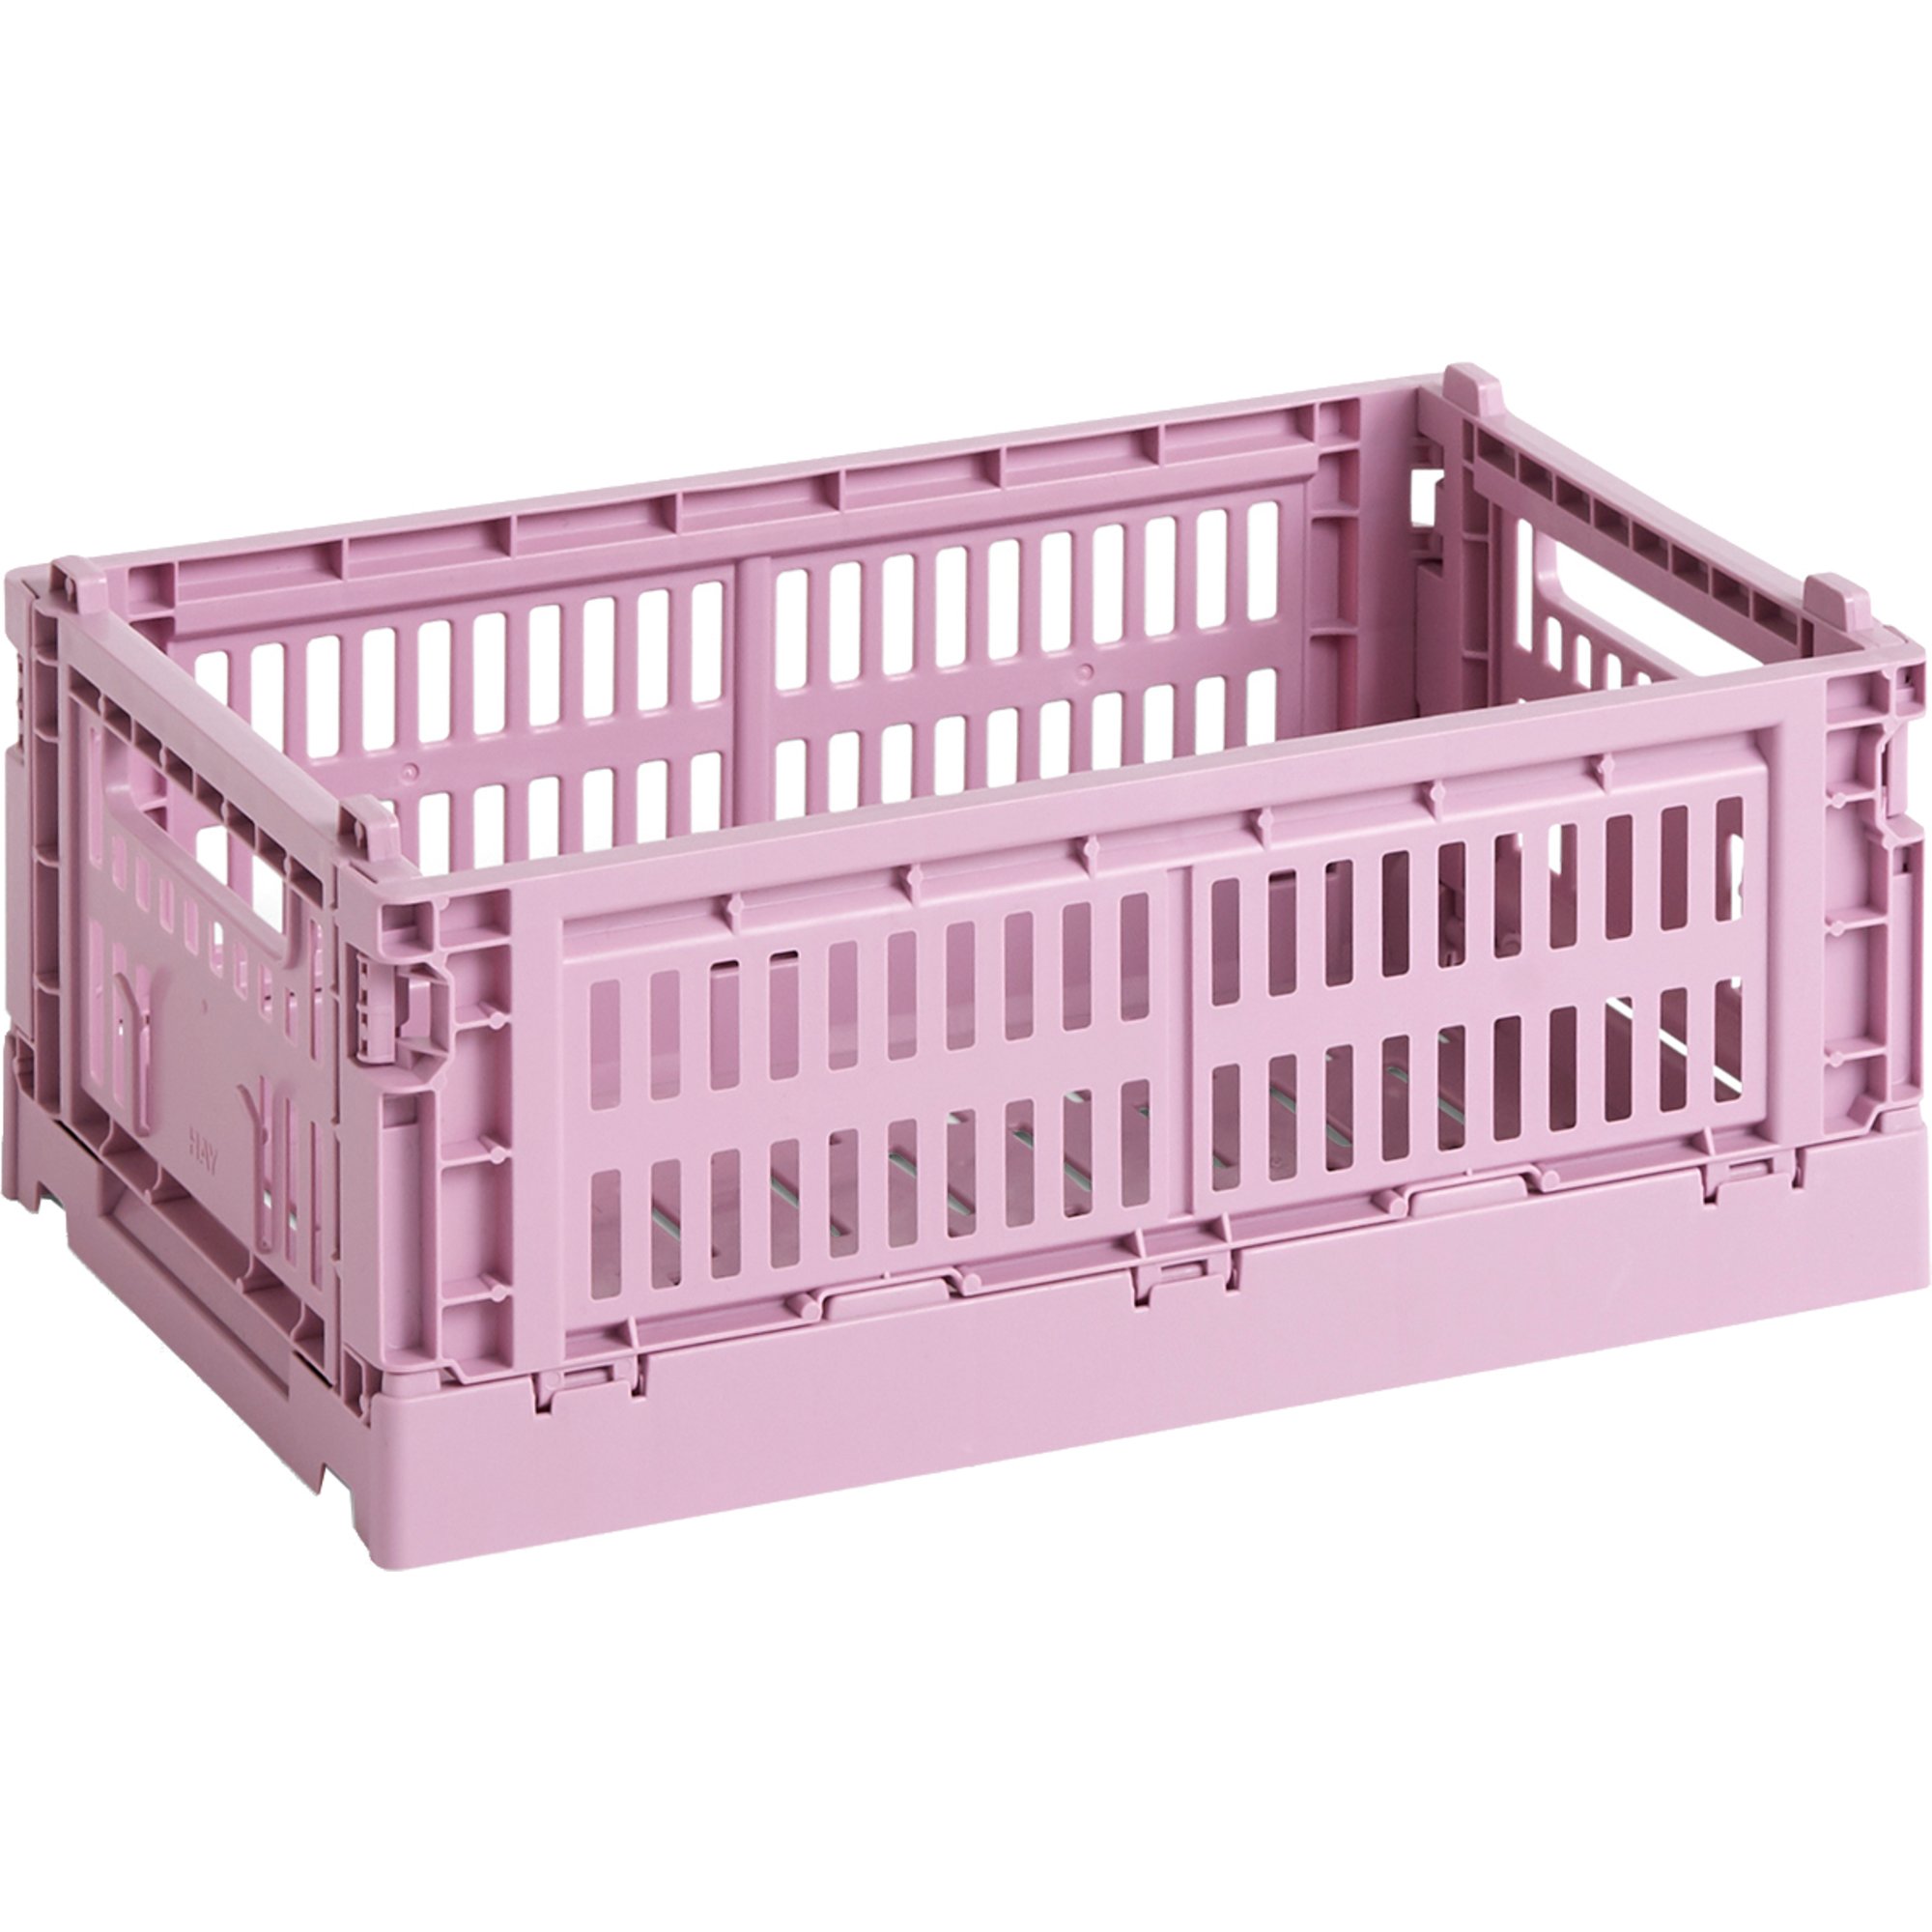 12: HAY Colour Crate opbevaringskasse, small, dusty rose